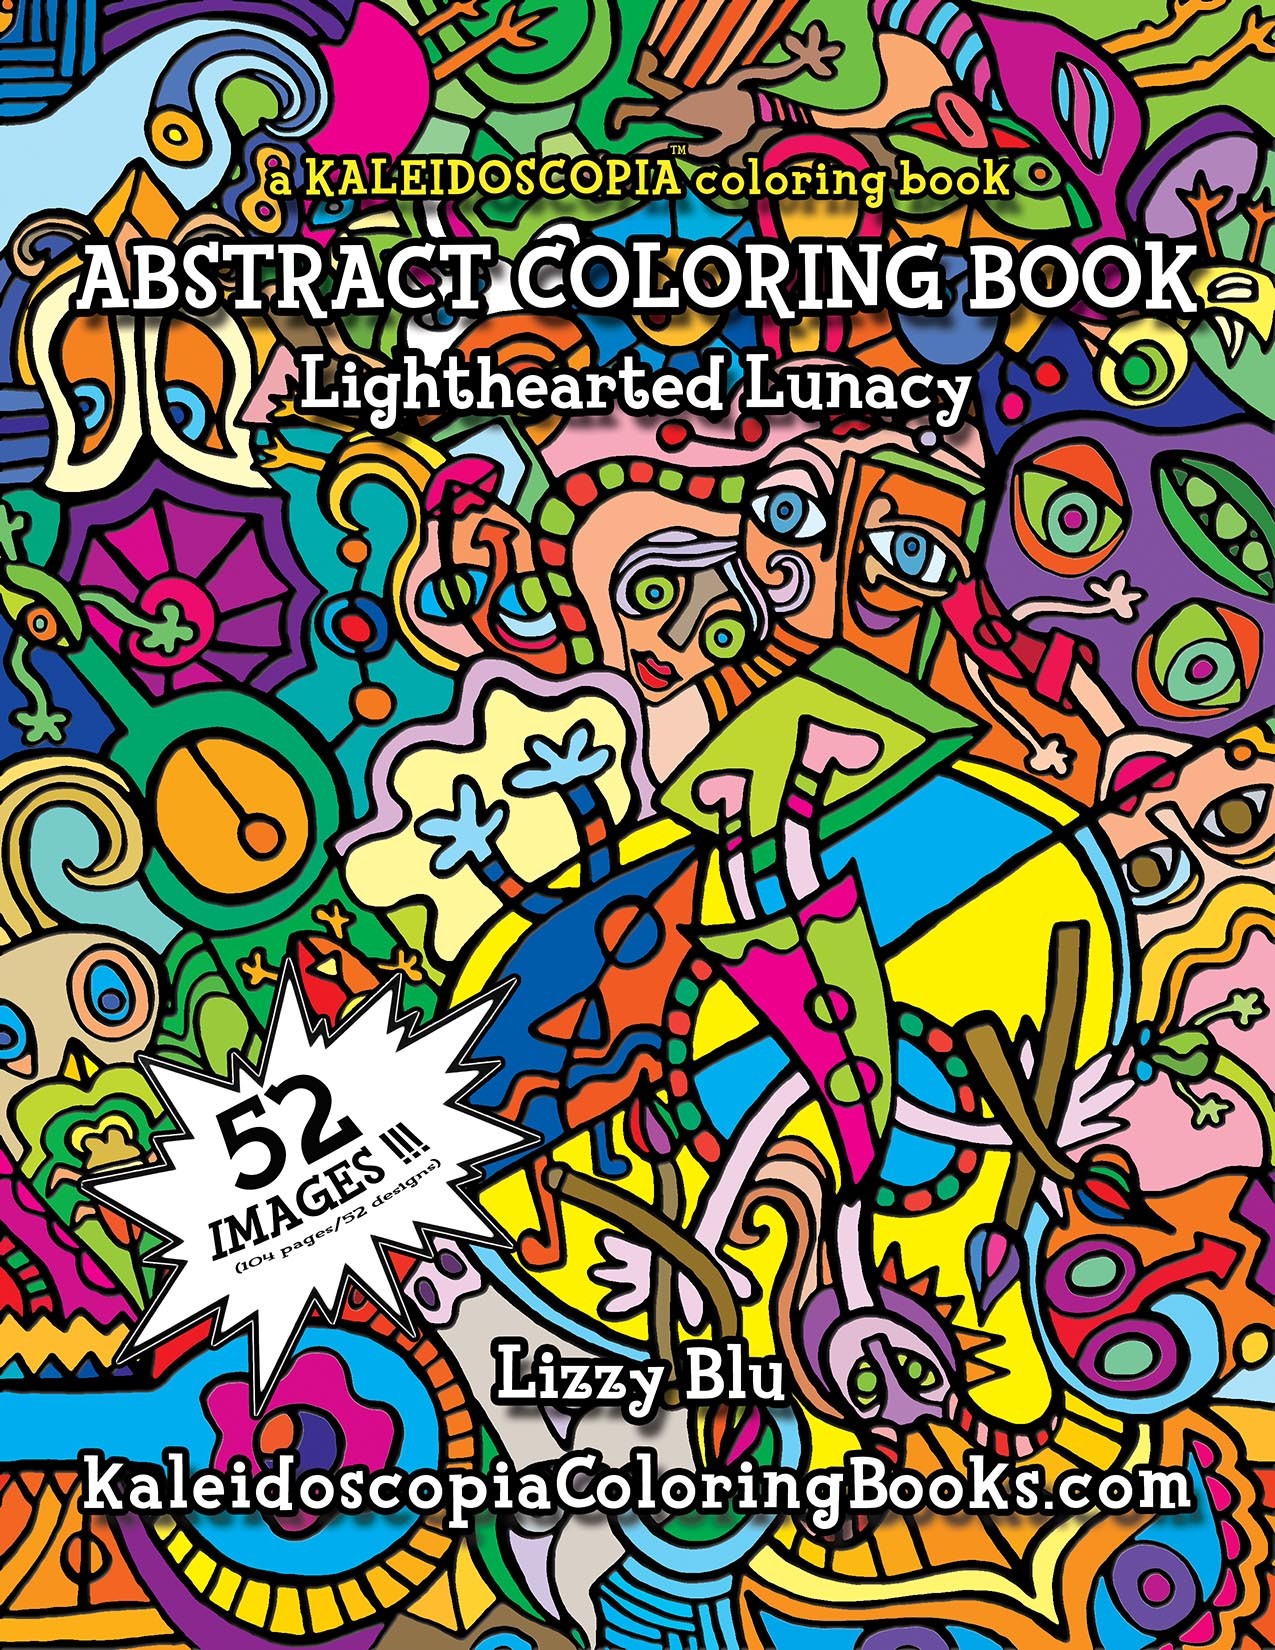 Lighthearted Lunacy: An Abstract Coloring Book 